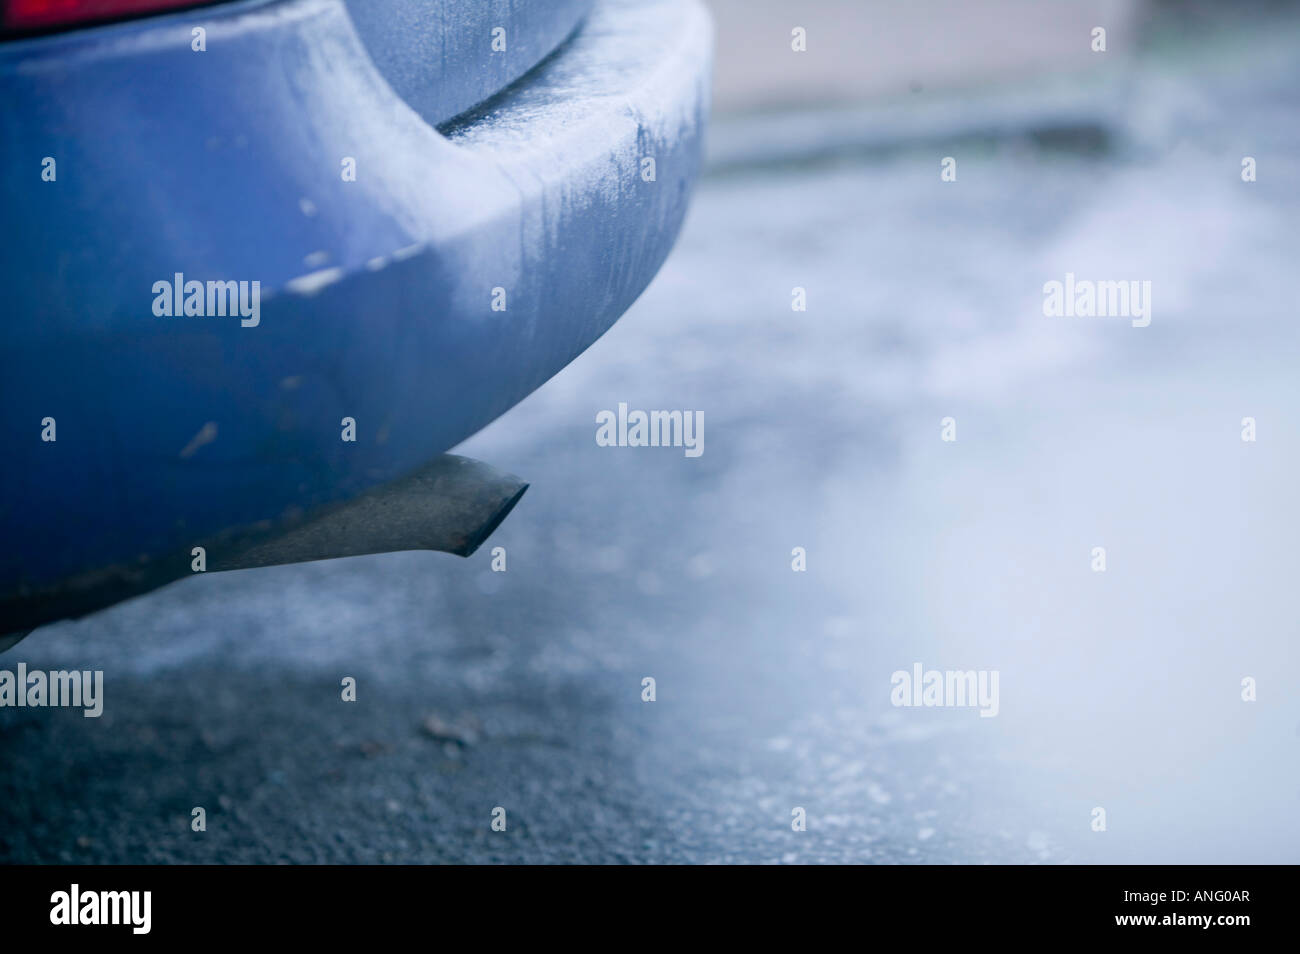 A car exhaust pipe emmitting exhaust fumes Stock Photo